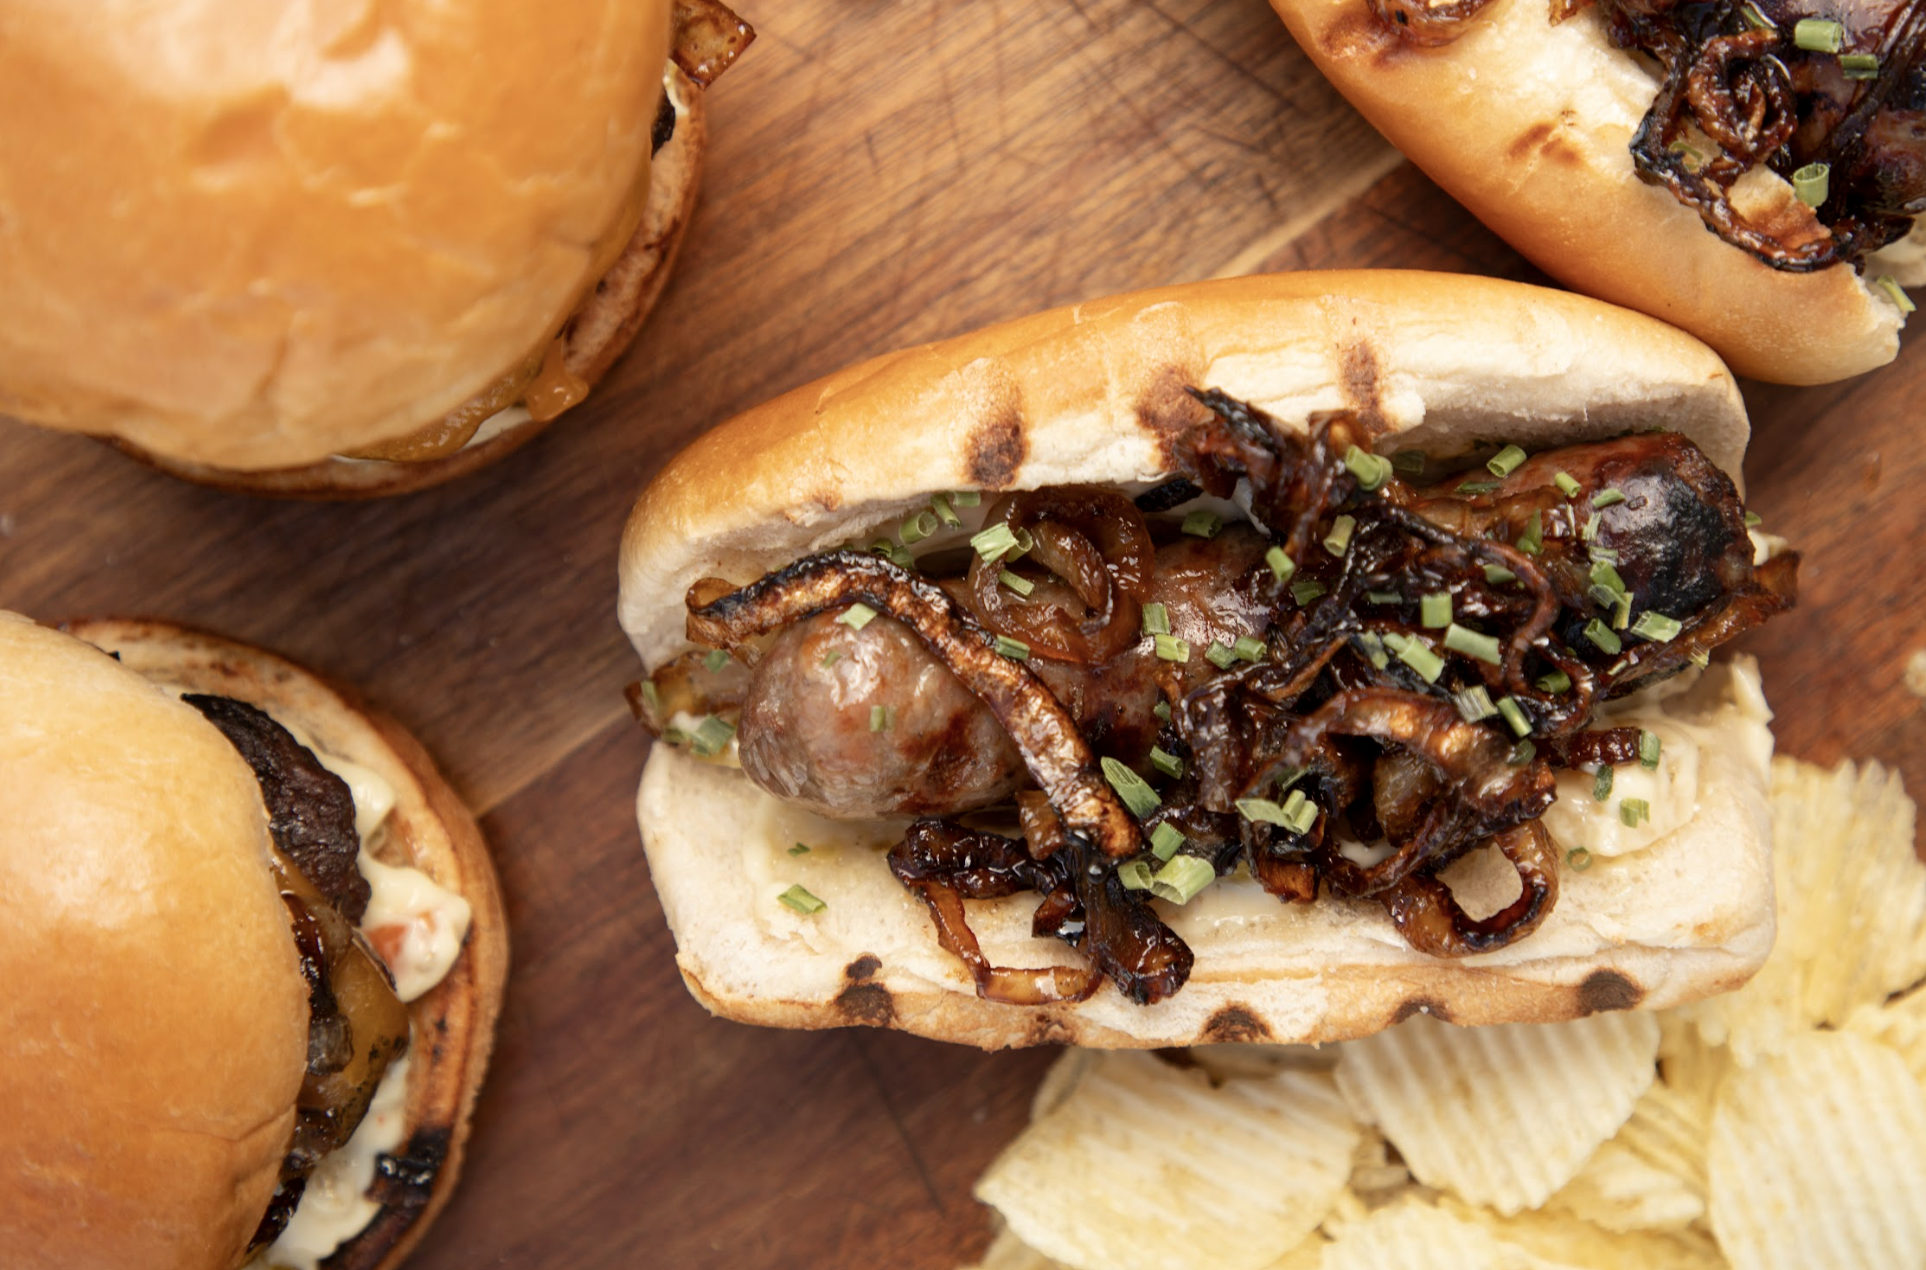 Caramelized Onion Burgers + Brats with Special Chicago Sauce